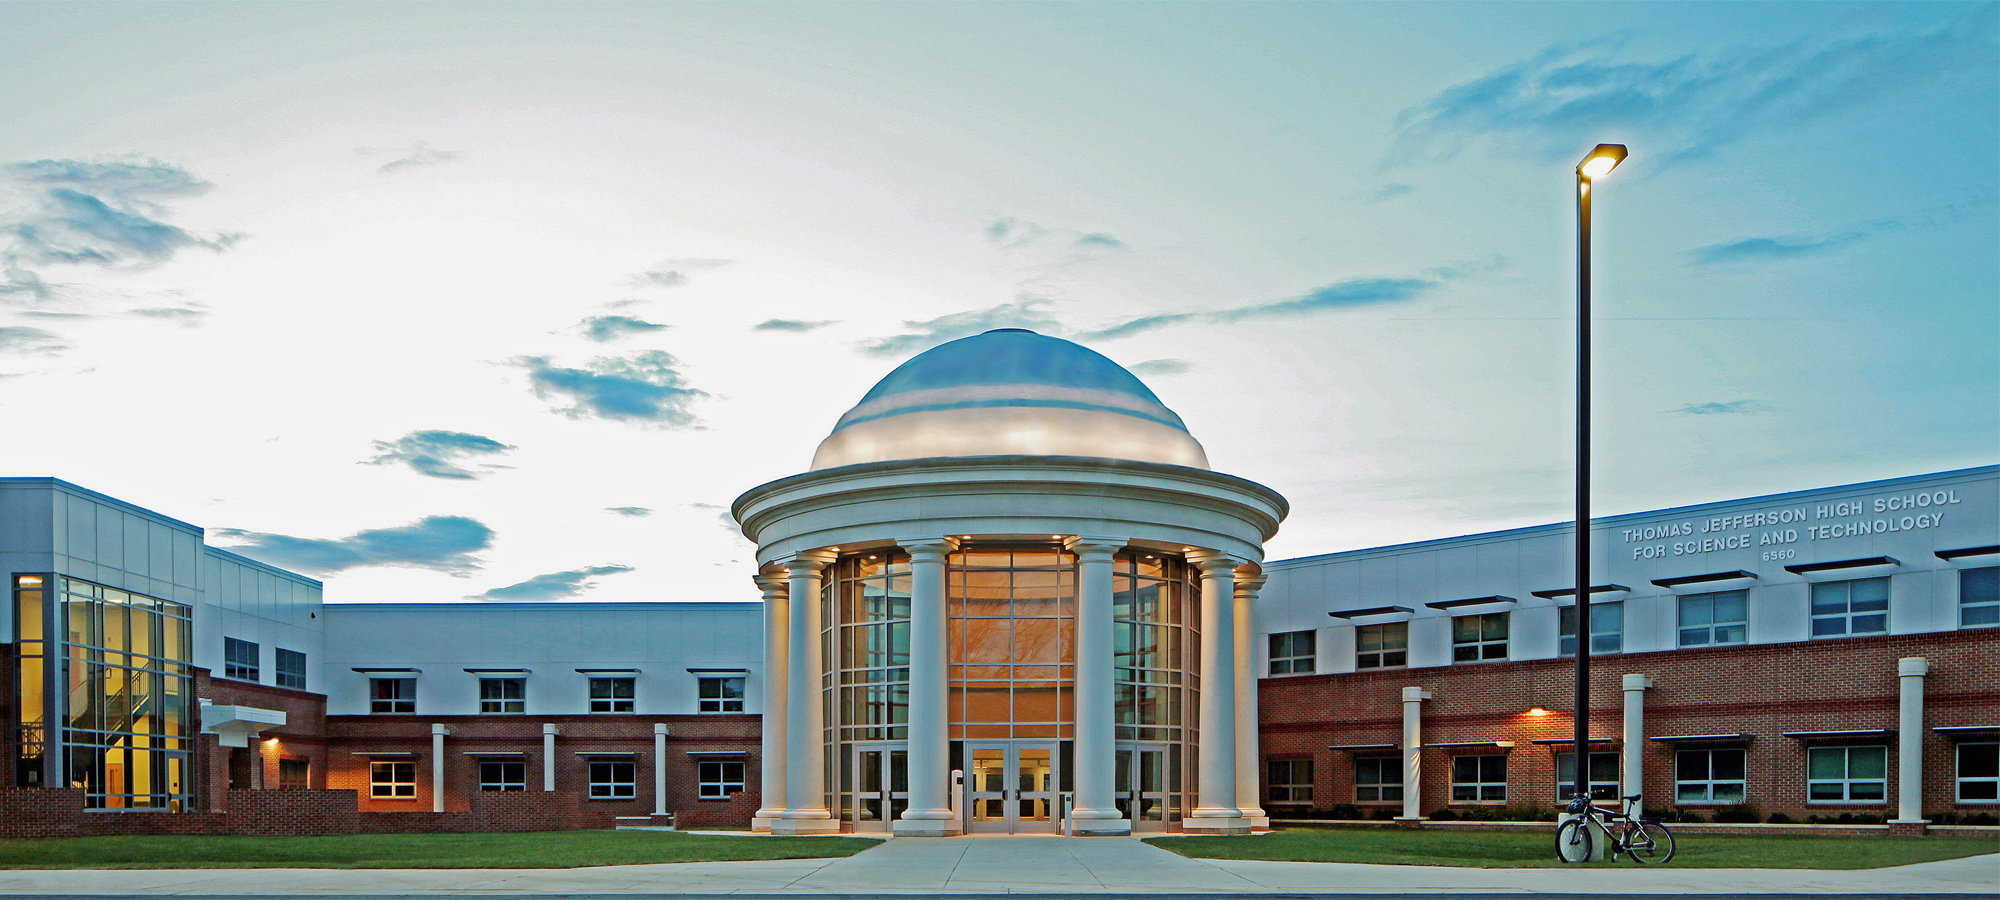 Thomas Jefferson High School for Science and Technology, Fairfax